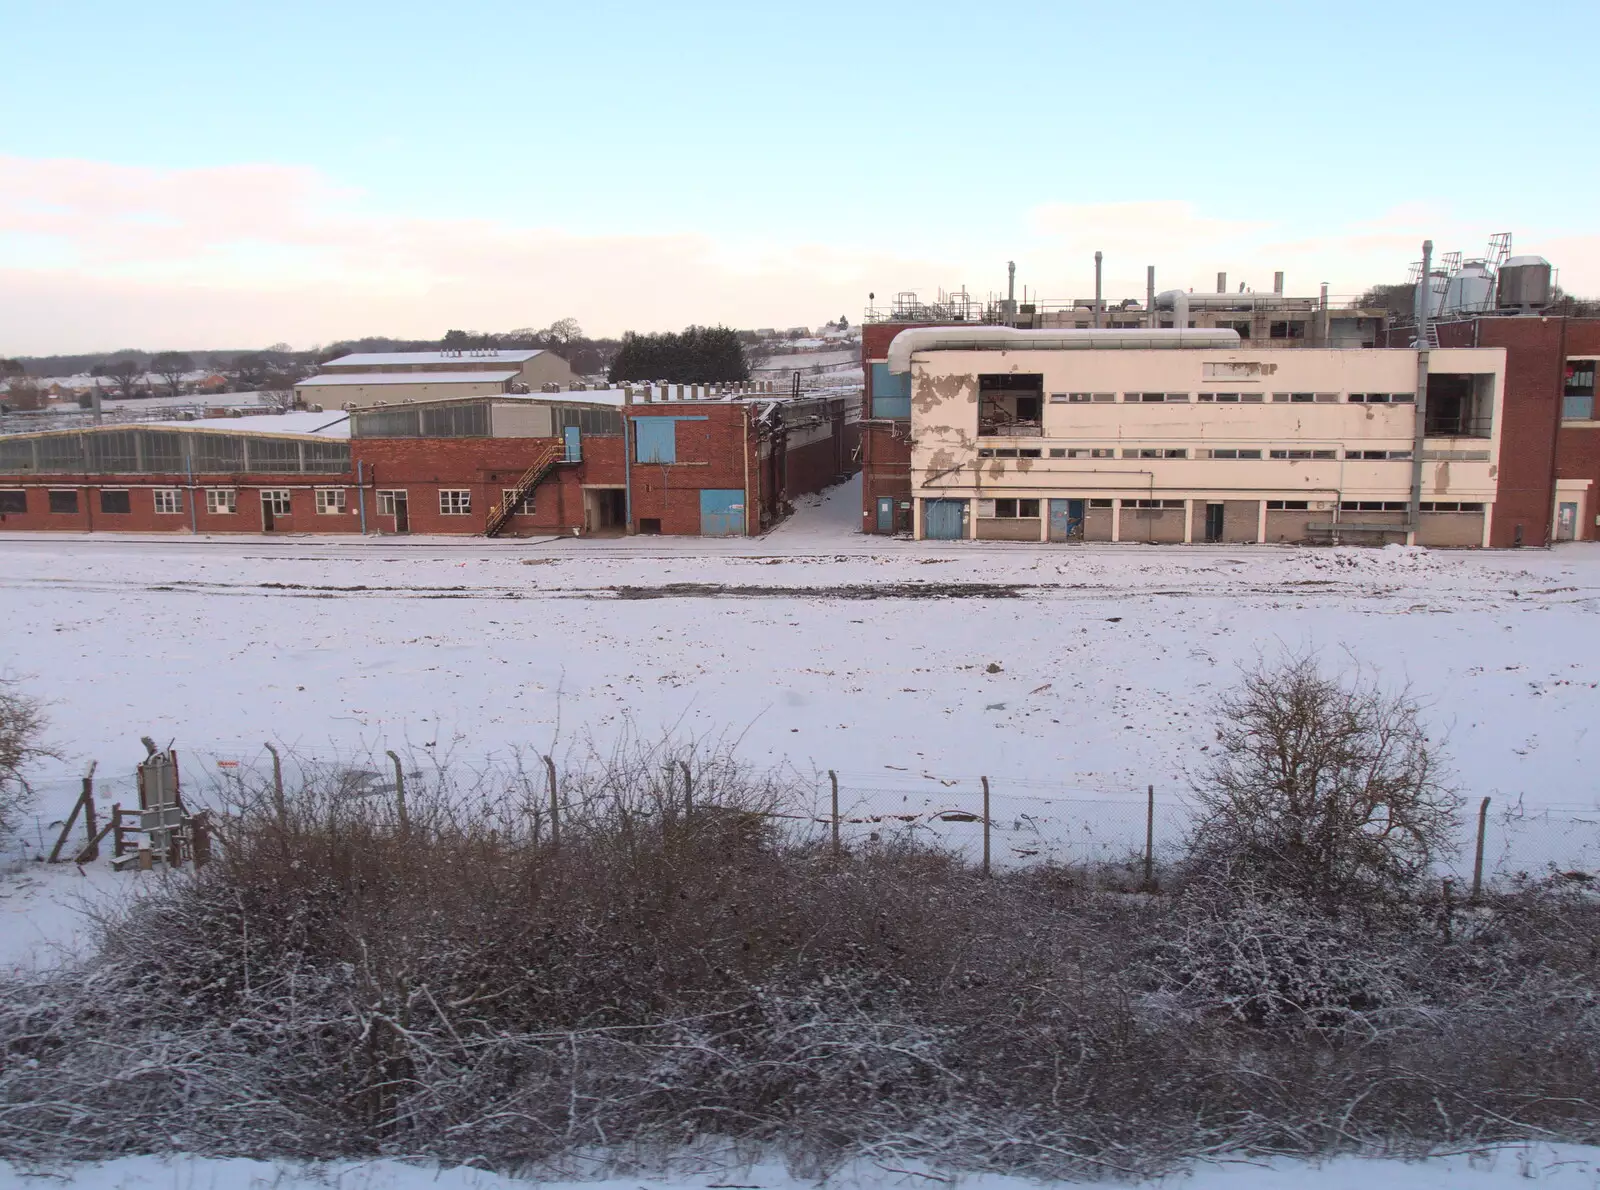 There's snow at the Xylotol factory in Brantham, from Snowmageddon: The Beast From the East, Suffolk and London - 27th February 2018